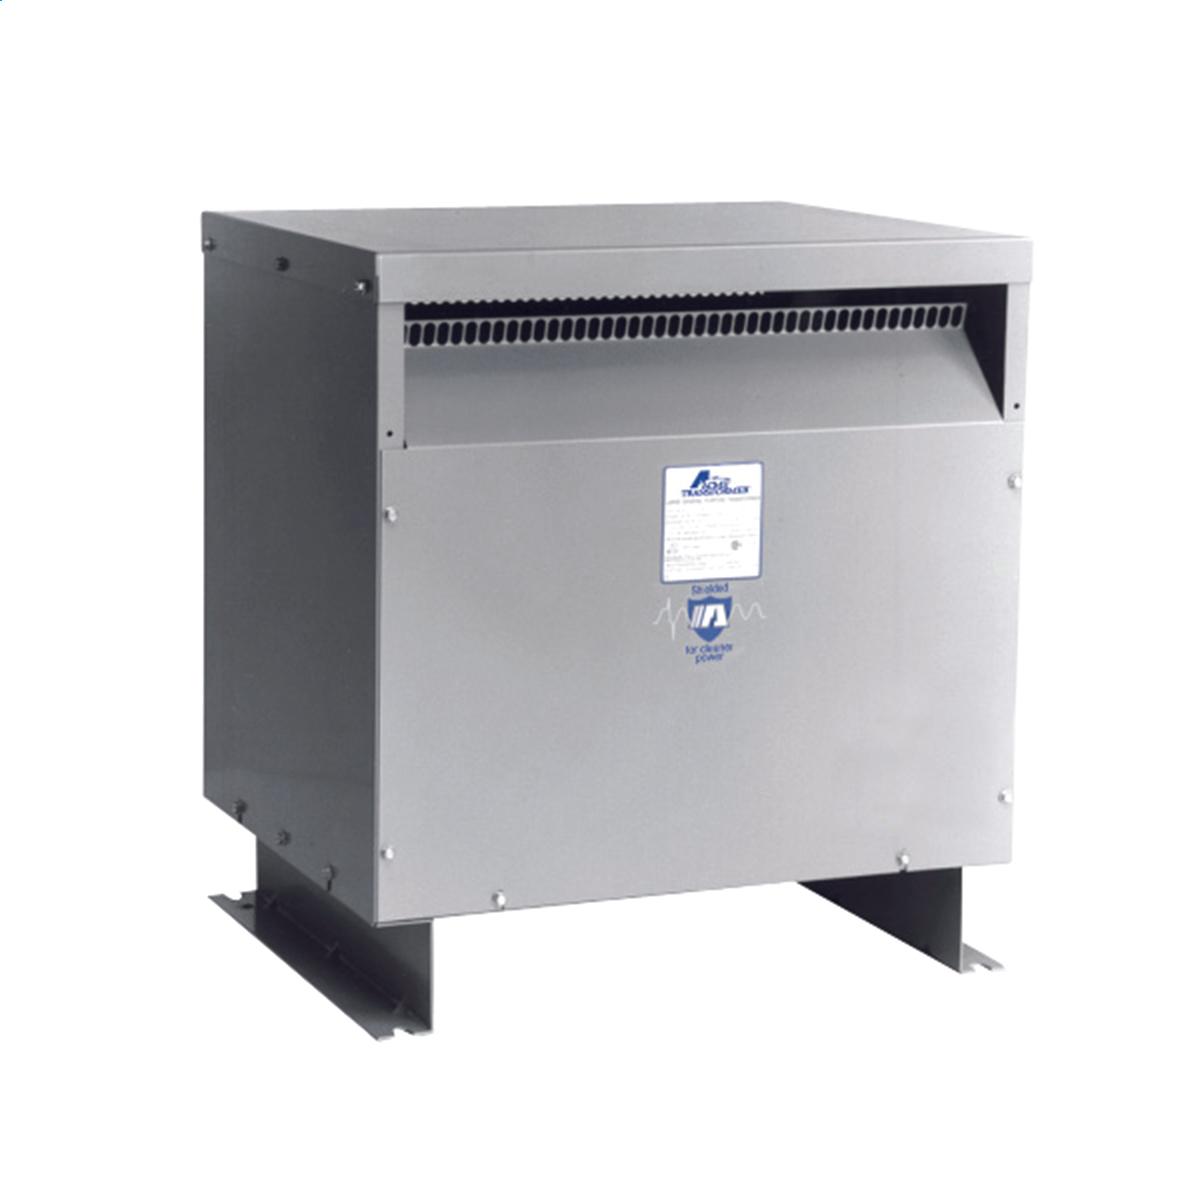 Hubbell WI045K17 Medium Voltage Transformer - Three Phase, 4160Δ - 240ΔV, 45kVA  ; Lower operating cost over Liquid-filled ; No additional fireproofing or venting ; Long life expectancy ; Smaller, lighter easy to maintain